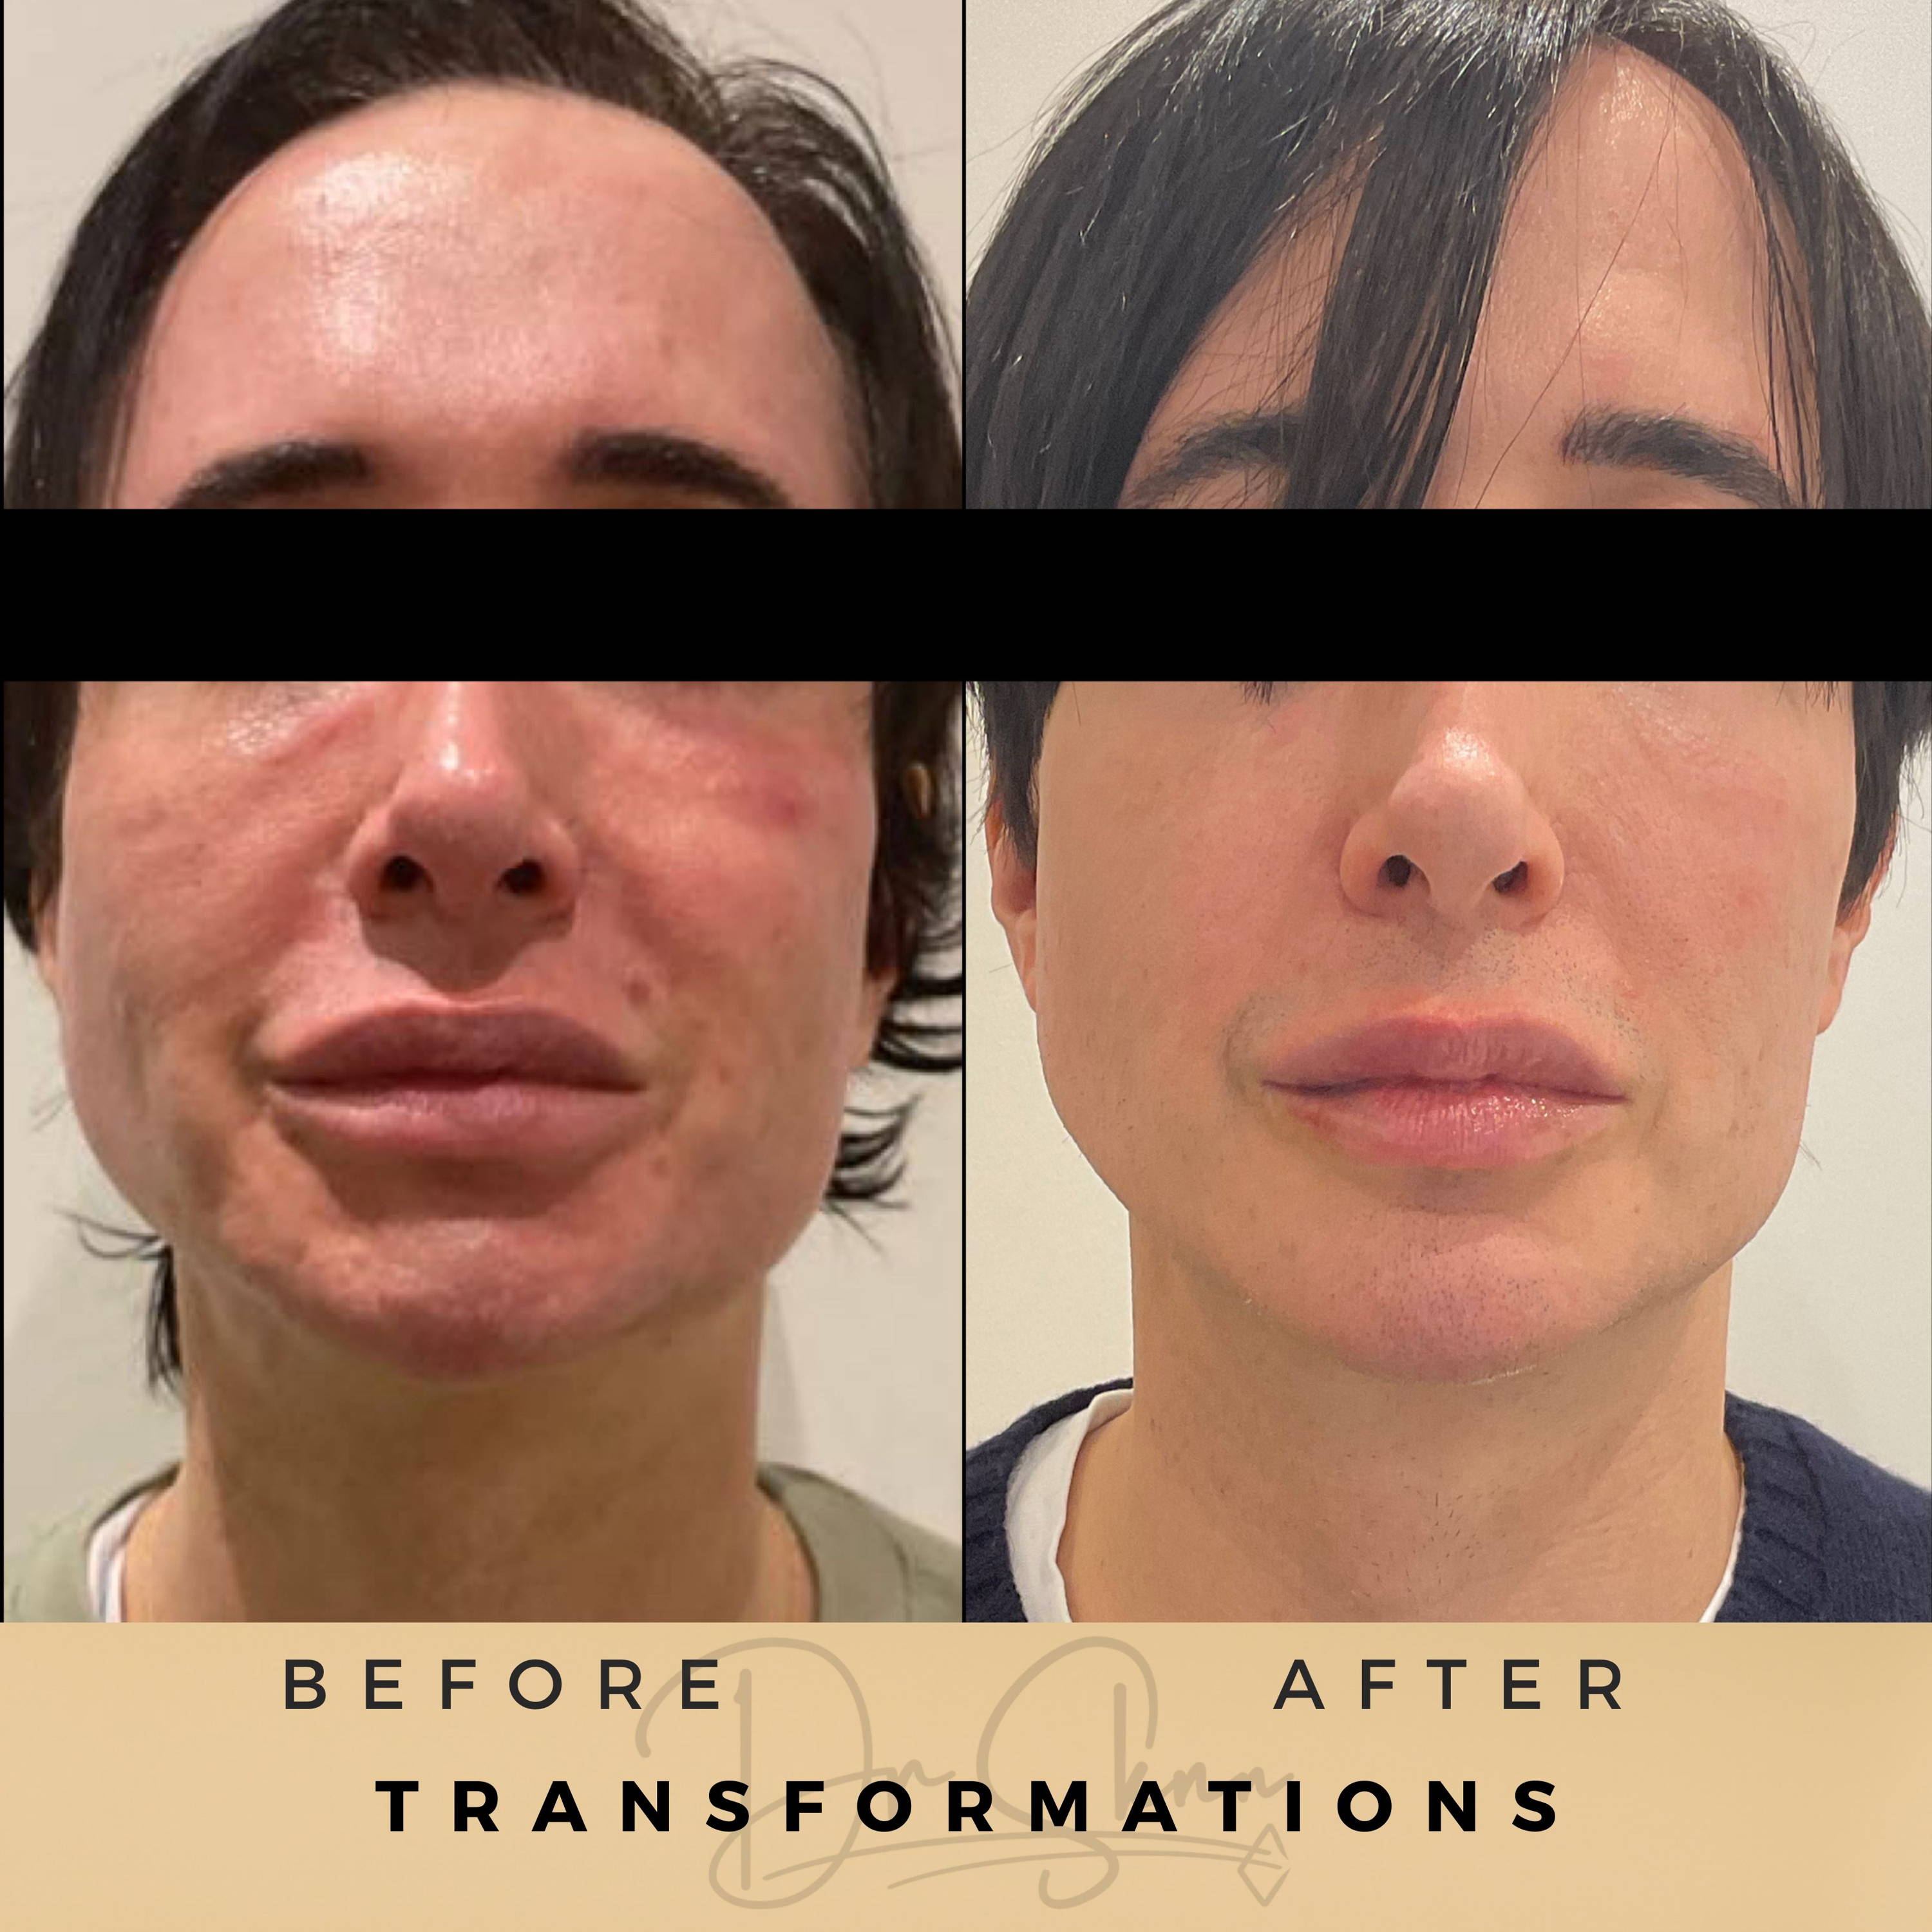 Aesthetic Clinic Wilmslow Transformation